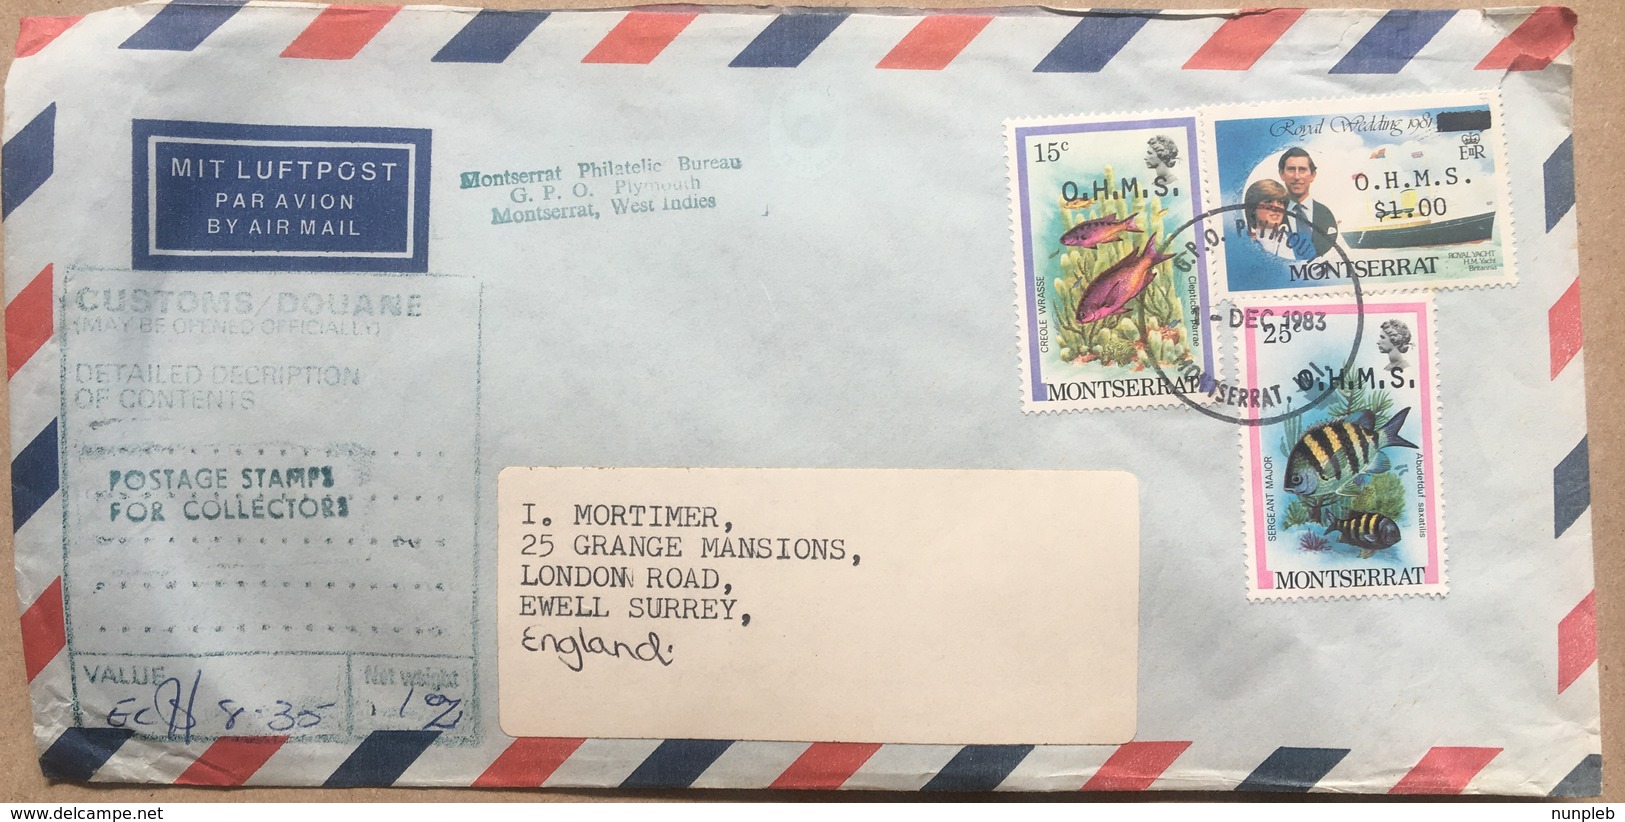 MONTSERRAT 1983 Air Mail Cover To England With Customs Cachet Tied With OHMS Overprints - Montserrat